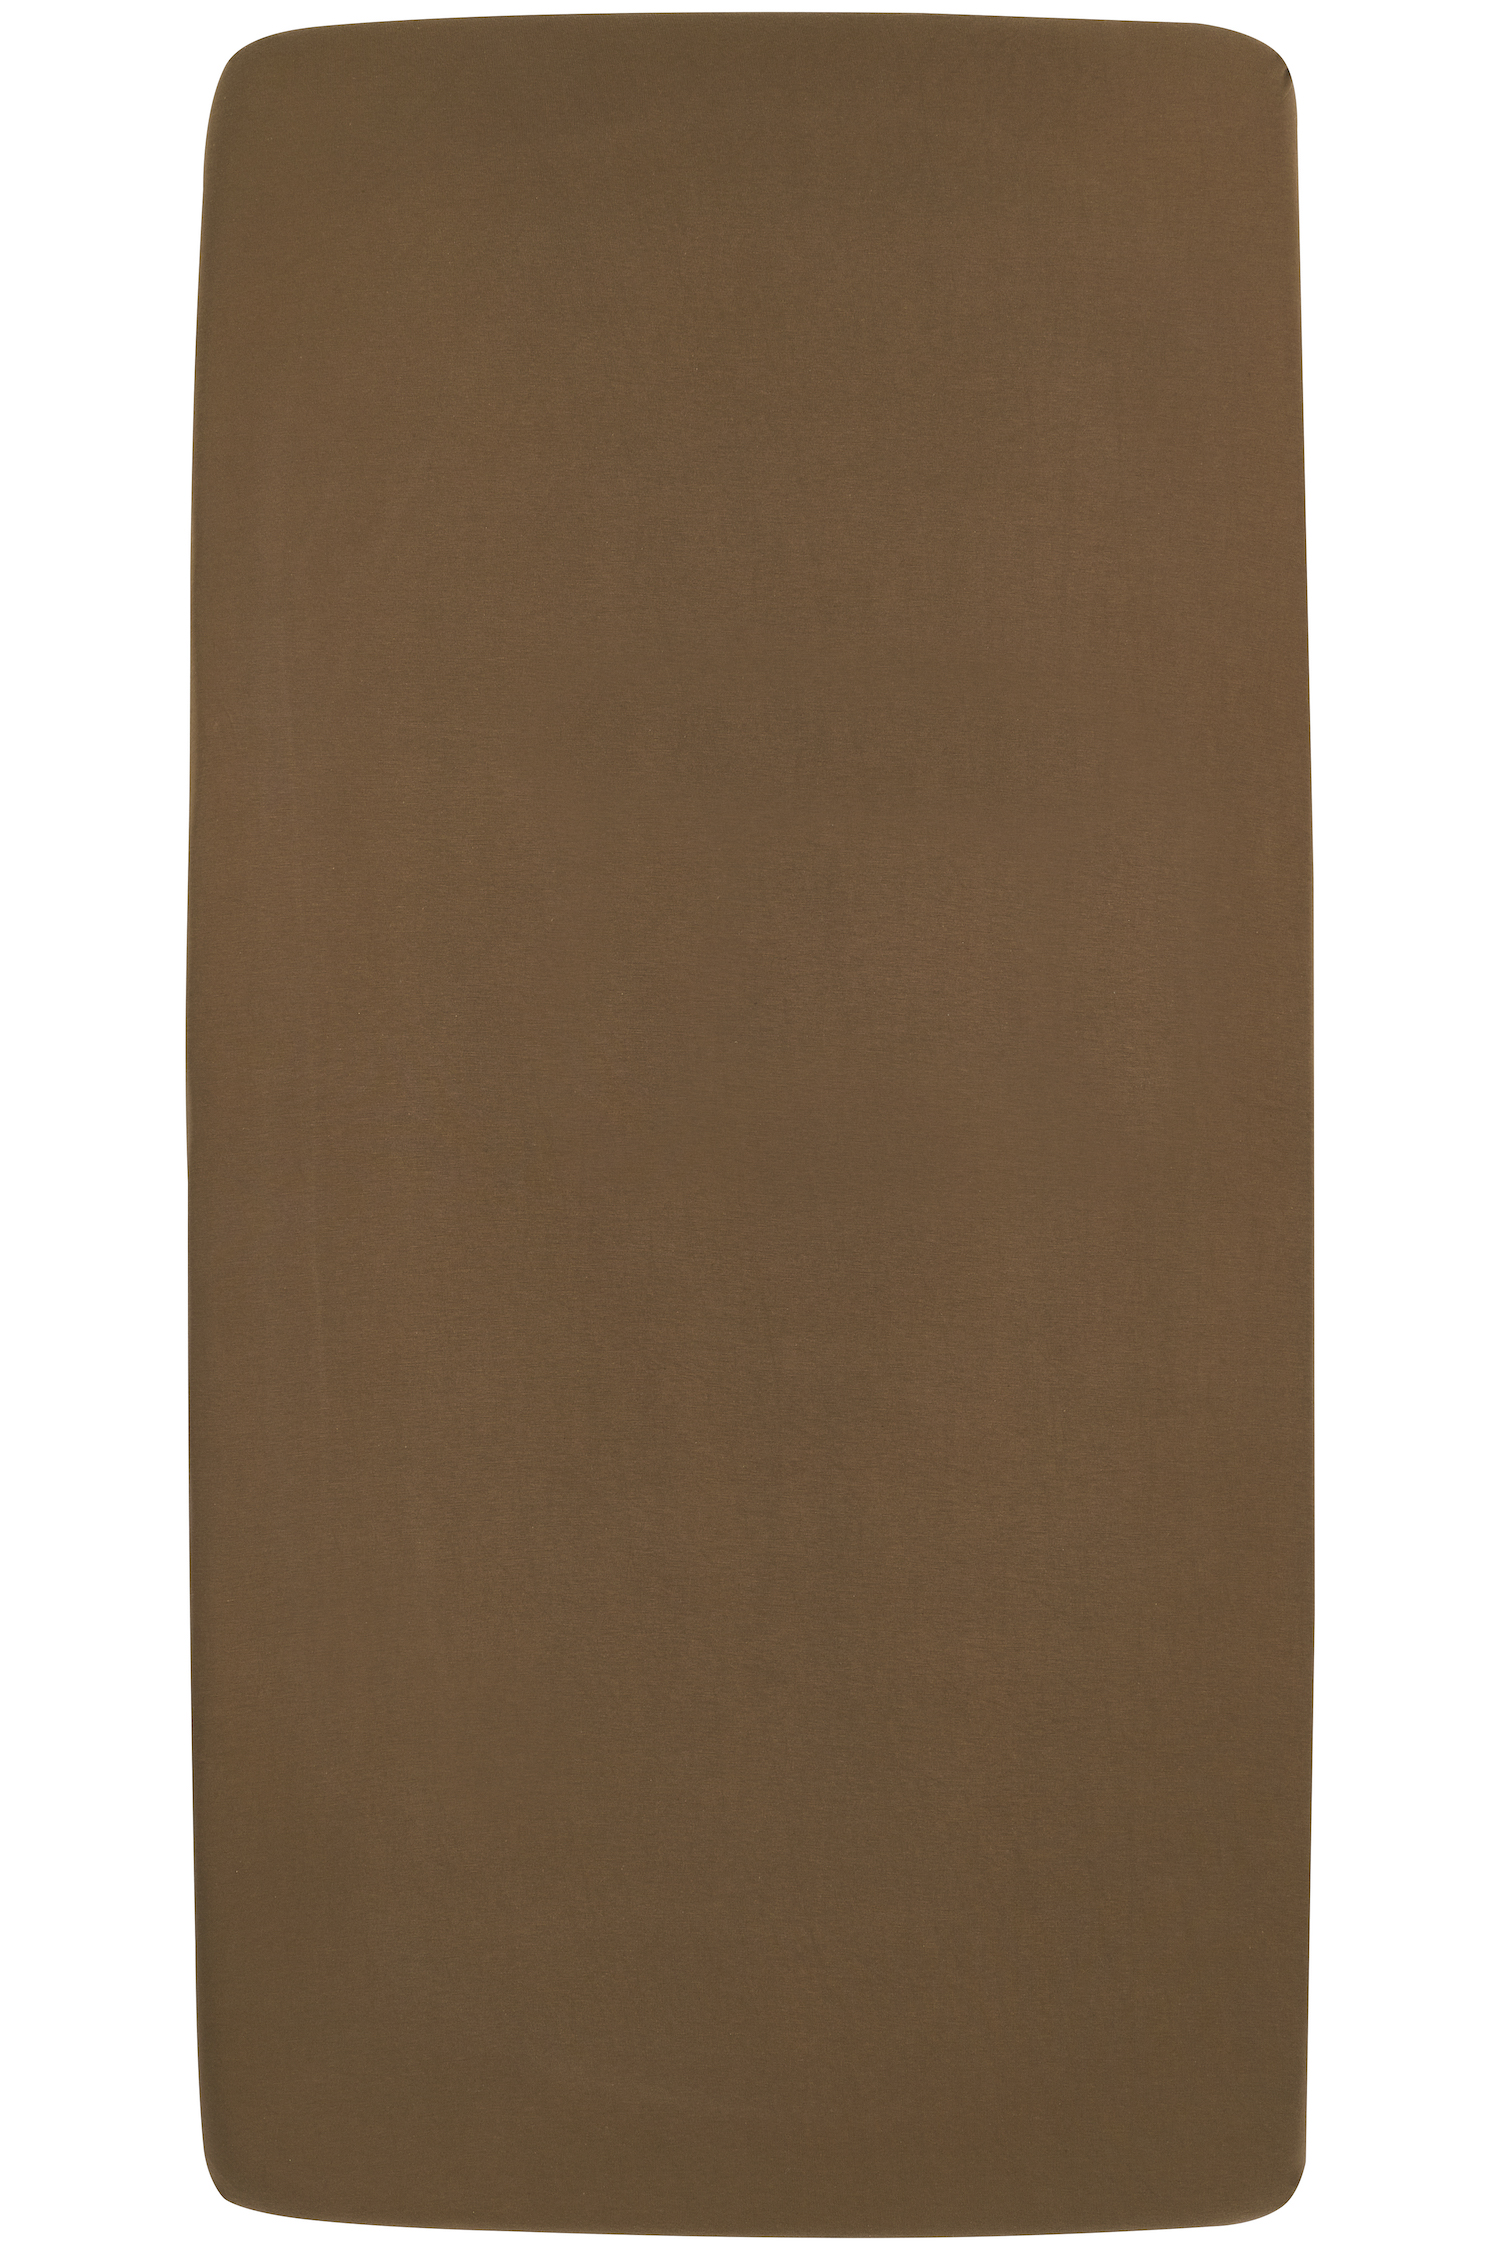 Jersey Fitted Sheet - Chocolate - 40x80/90cm